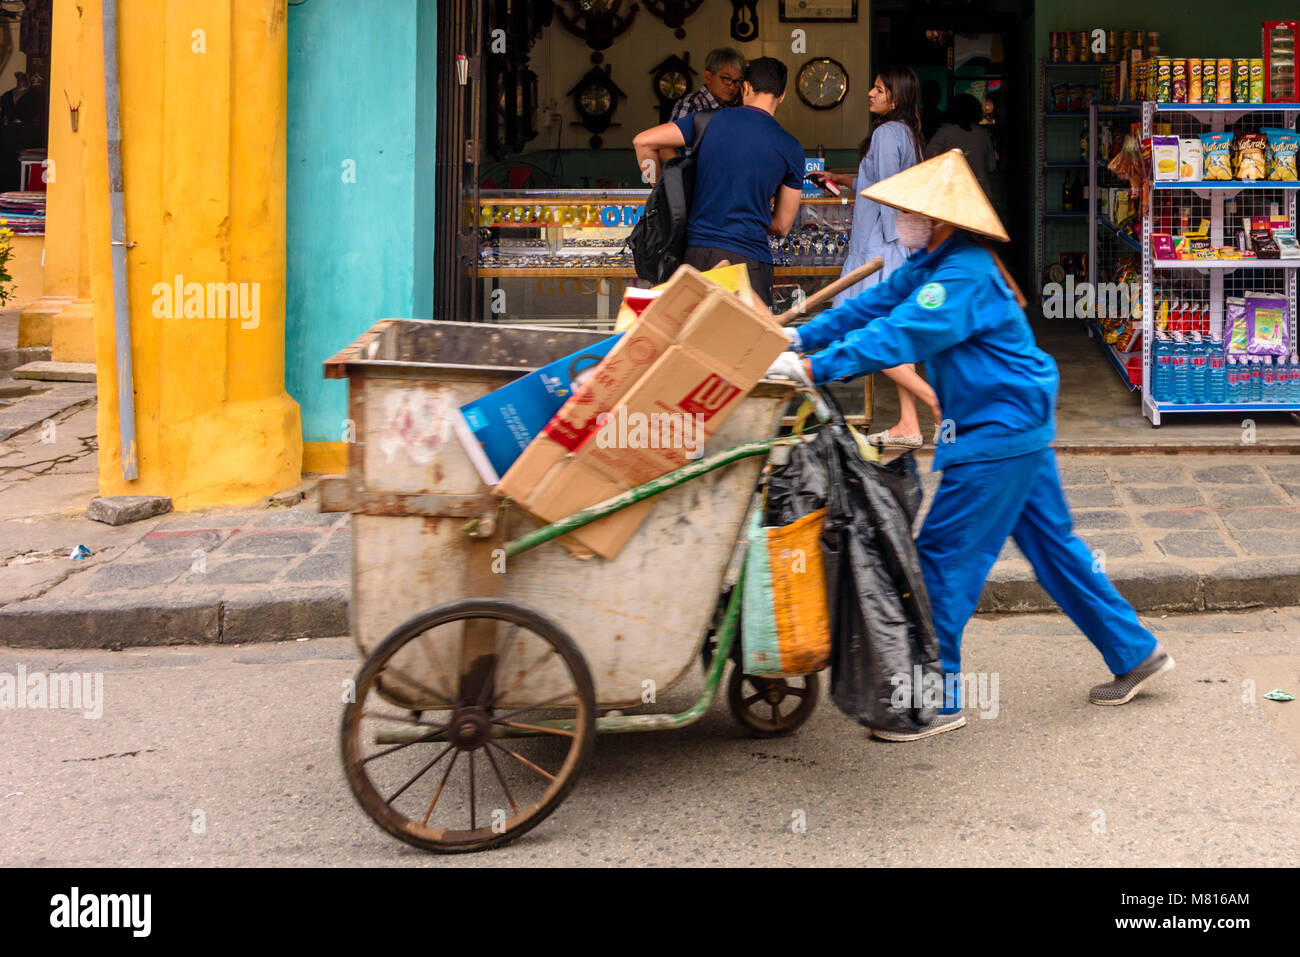 A street sweeper wearing a traditional bamboo conical hat, pushes a hand cart for collecting litter in Hoi An, Vietnam Stock Photo